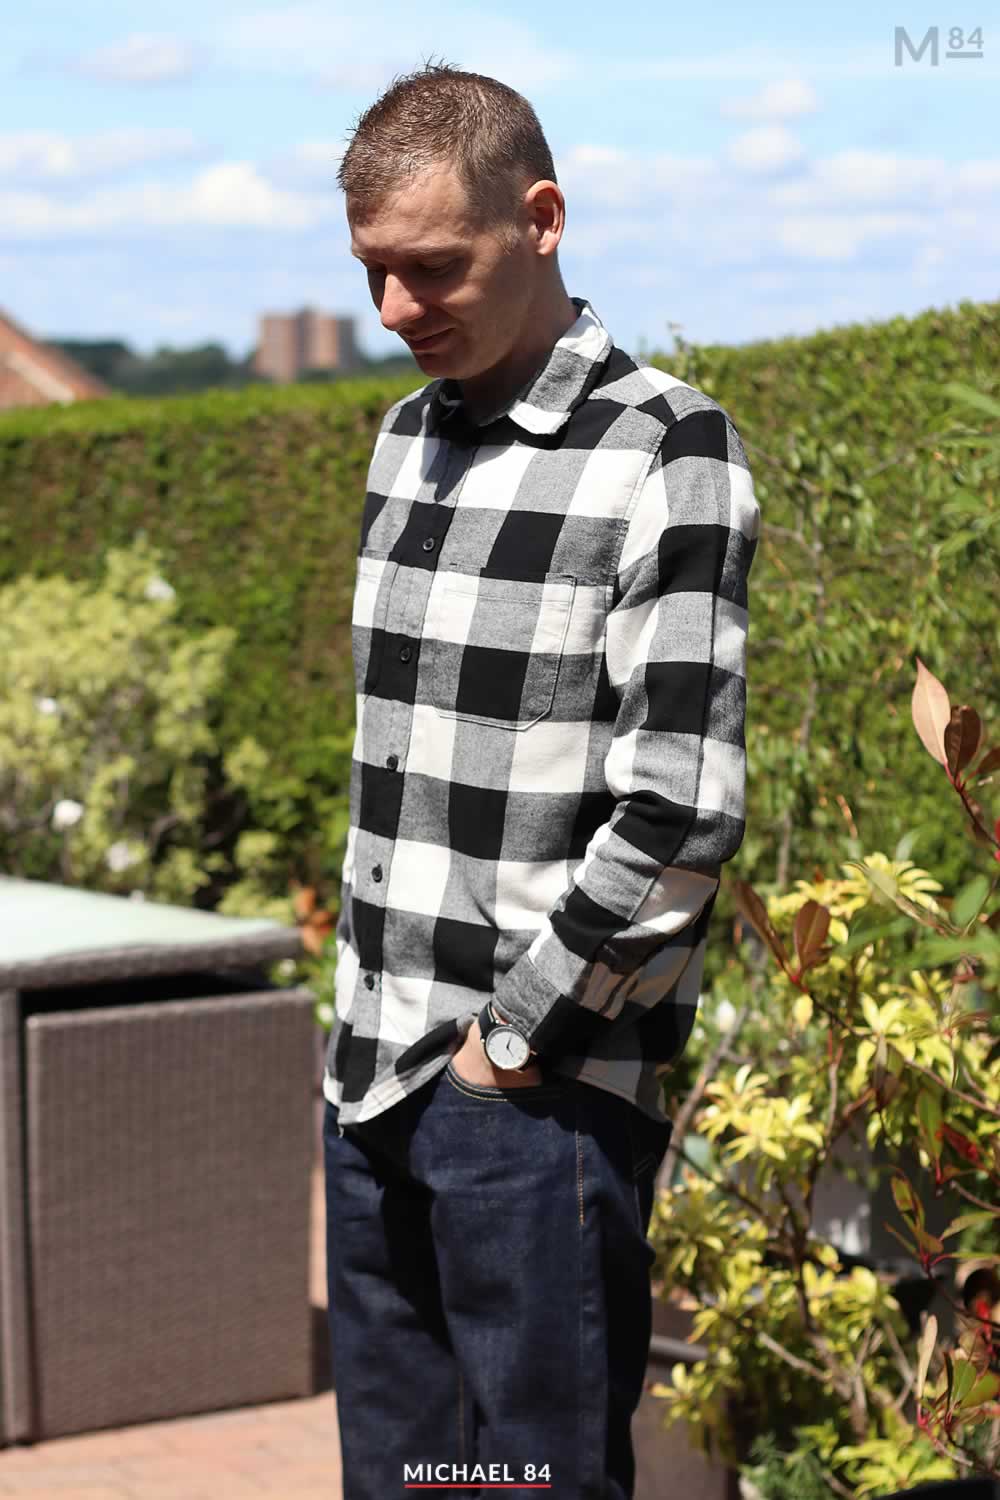 Black And White Plaid Shirt From H&M - Today's Outfit Style | Michael 84